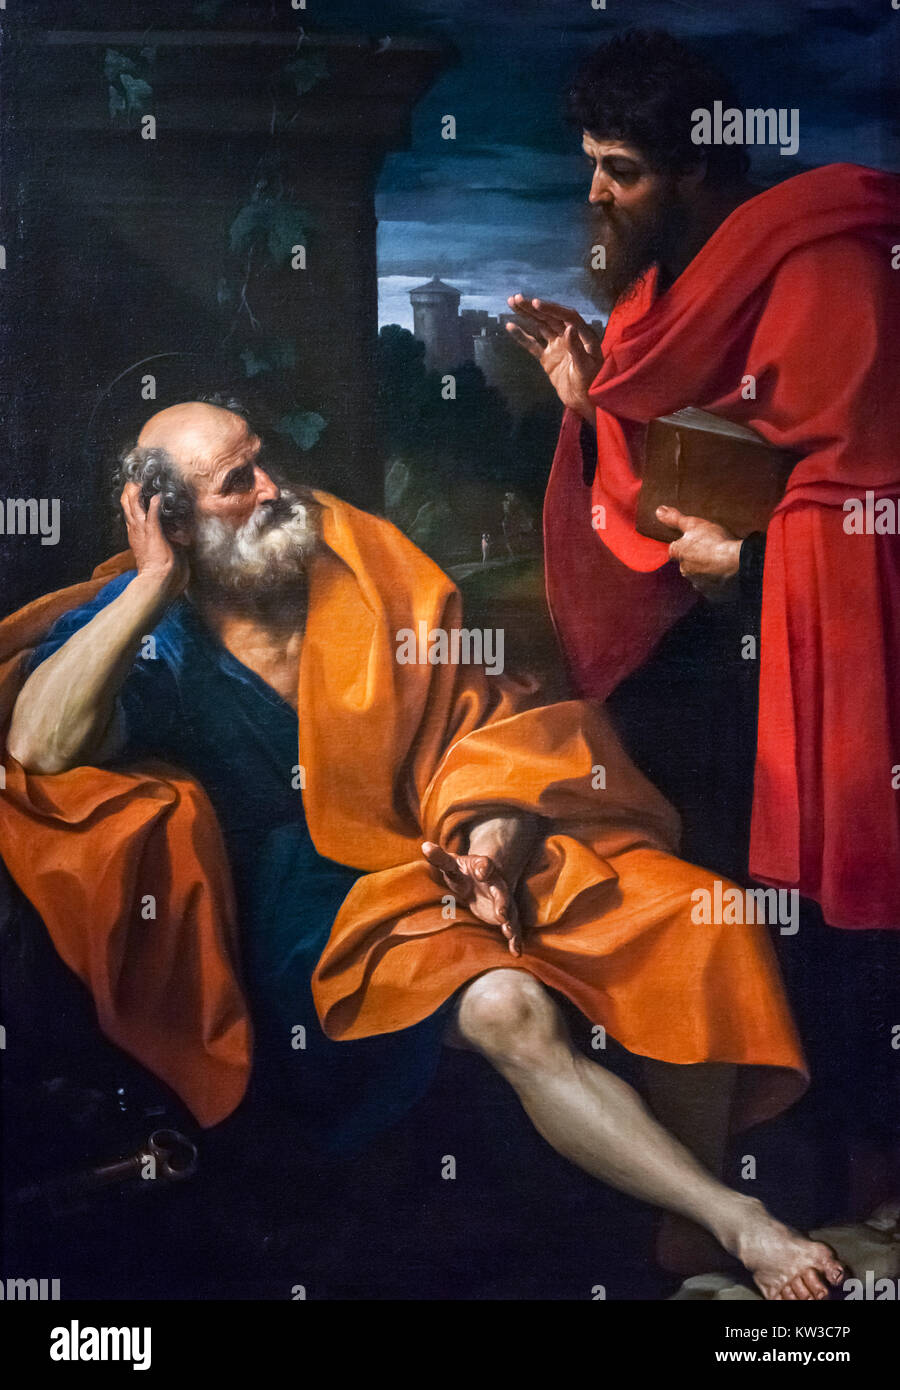 Paul Rebukes the Repentant Peter by Guido Reni (1575-1642), oil on canvas, 1609 Stock Photo